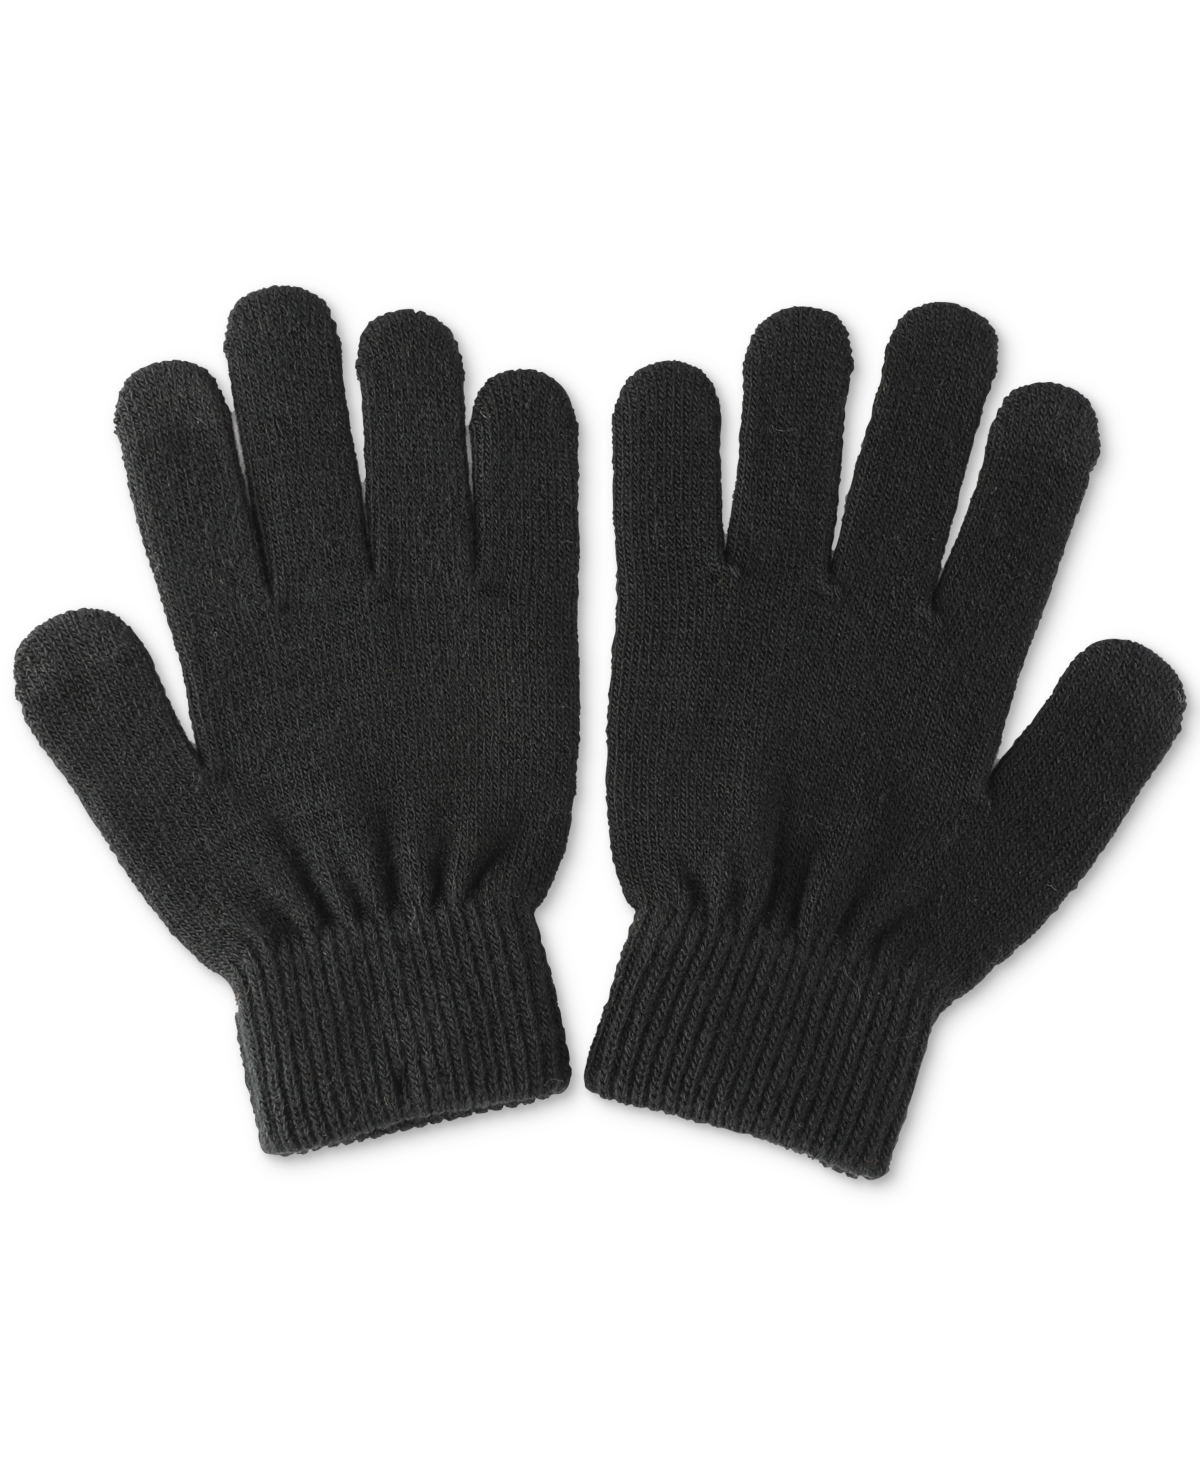 Men's Solid-Color Knit Gloves, Created for Macy's - Black